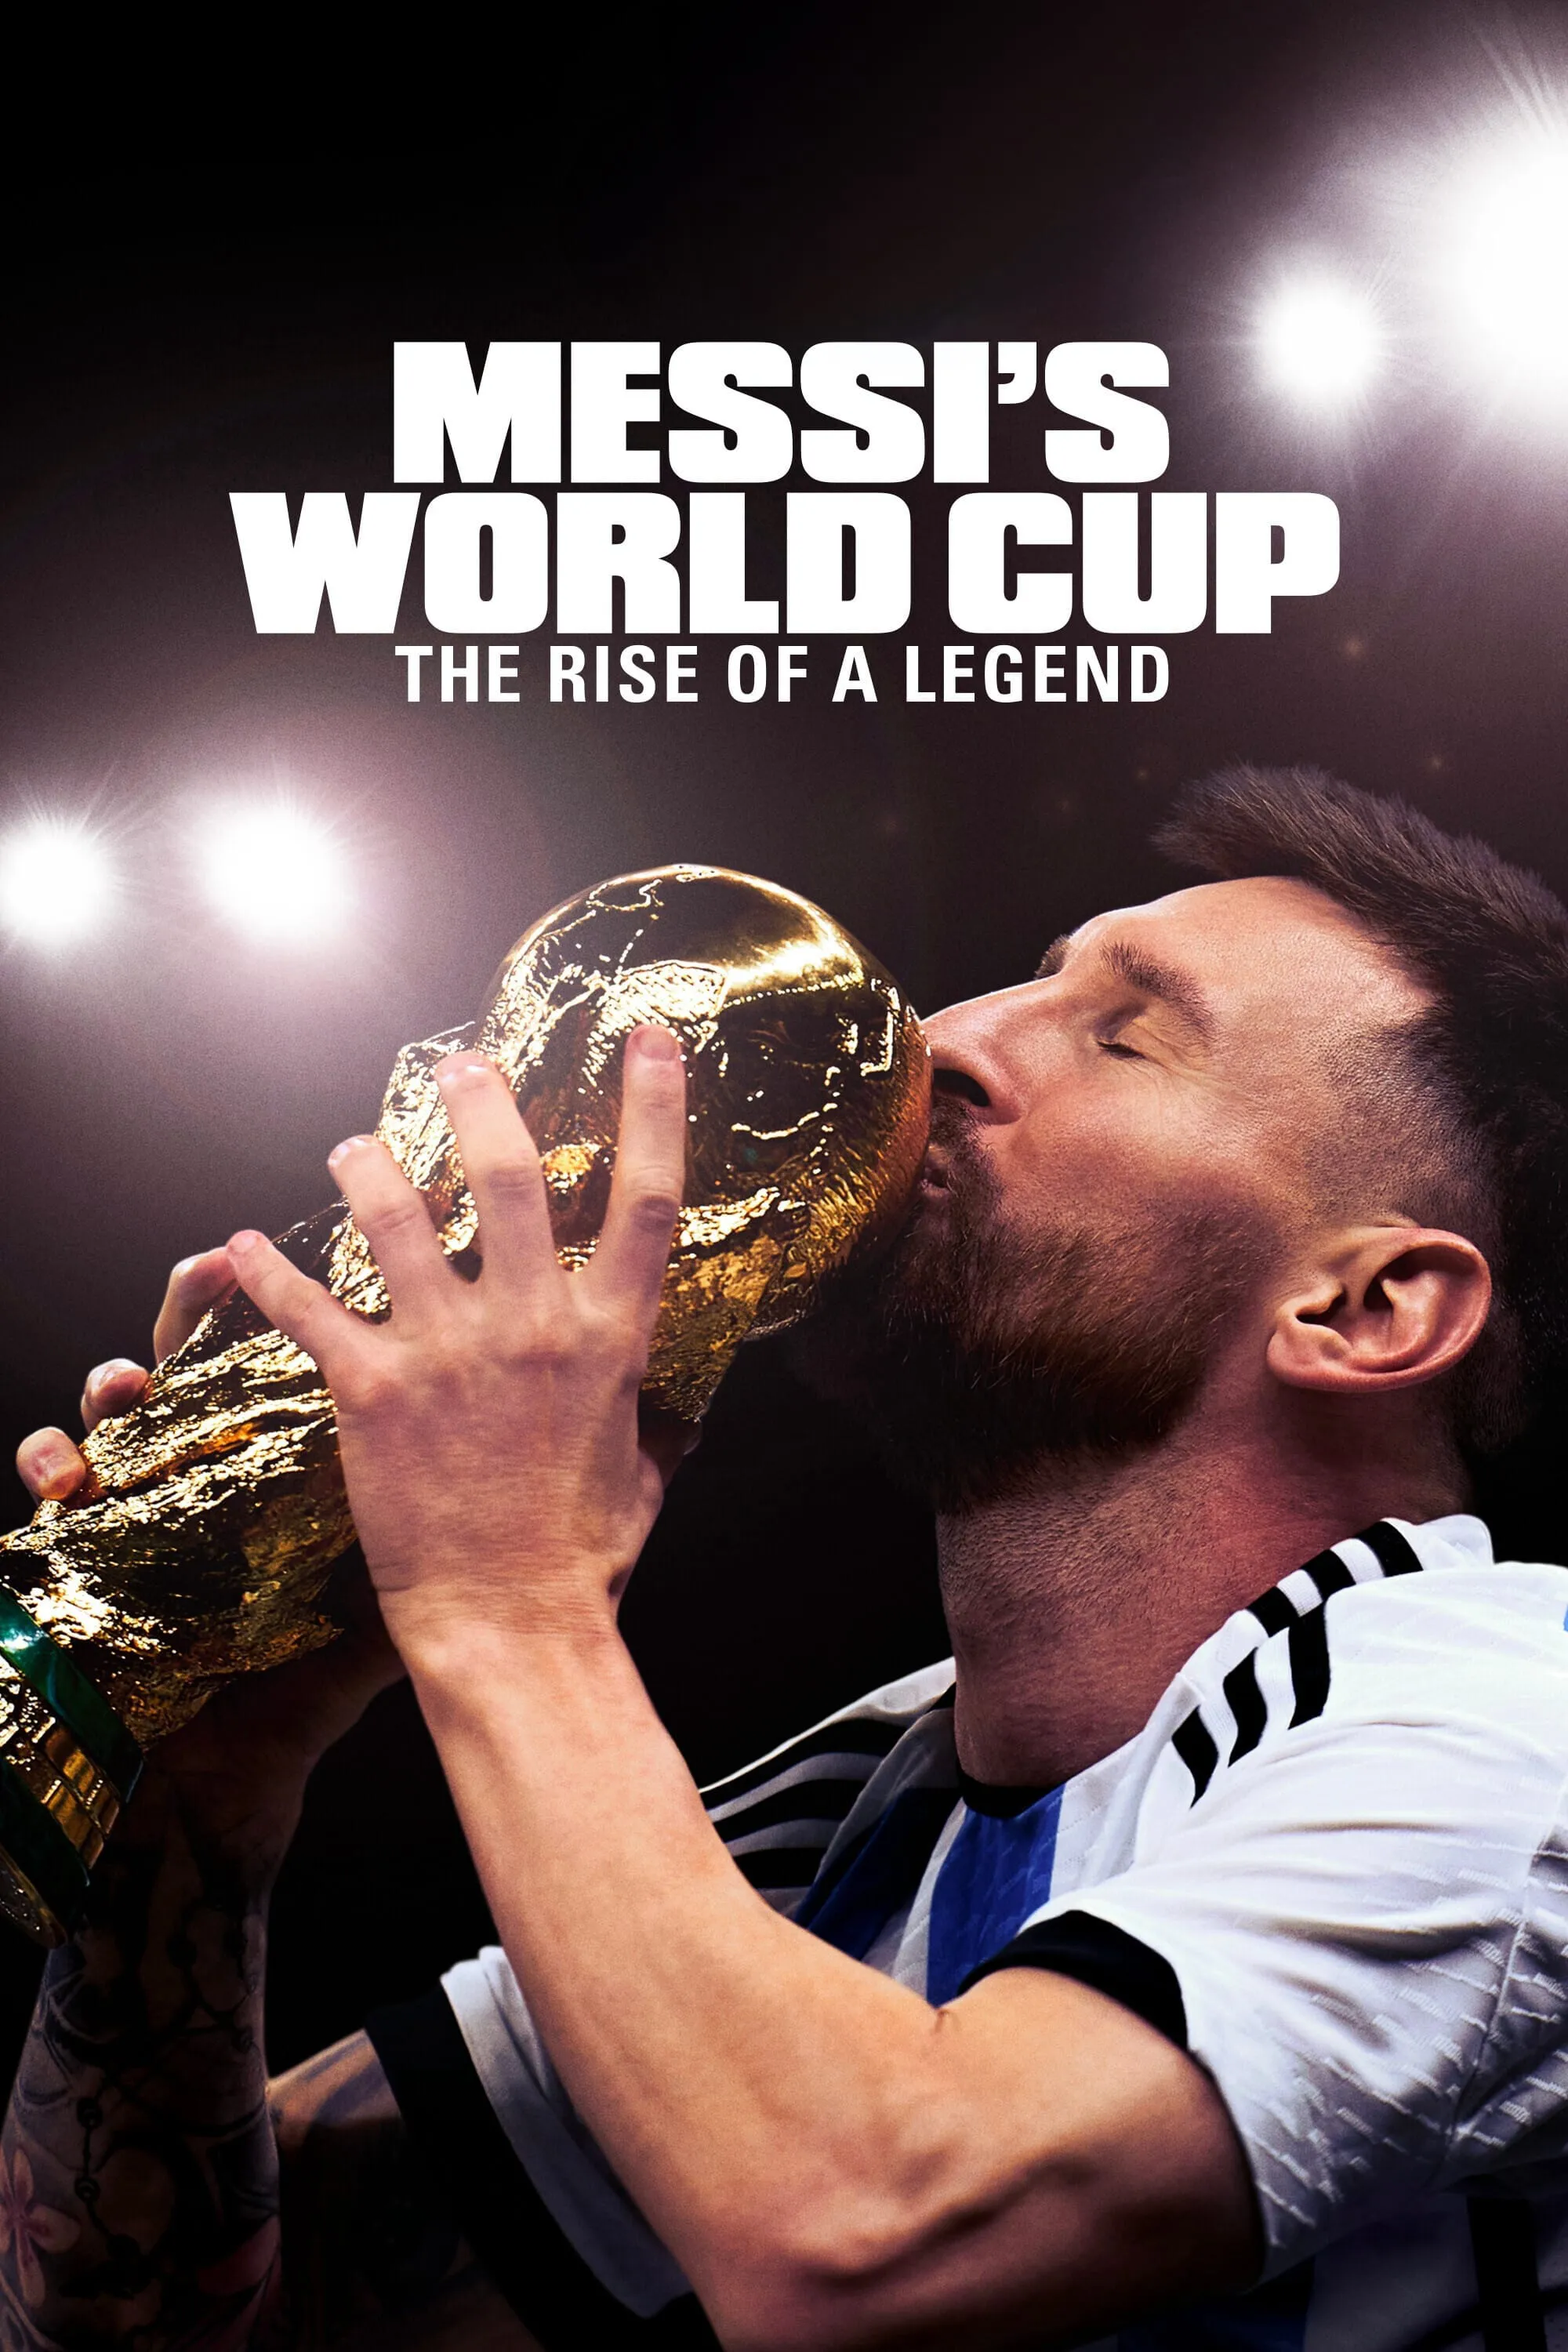 /media/16/ky-world-cup-cua-messi-huyen-thoai-toa-sang-messis-world-cup-the-rise-of-a-legend-thumb.jpg